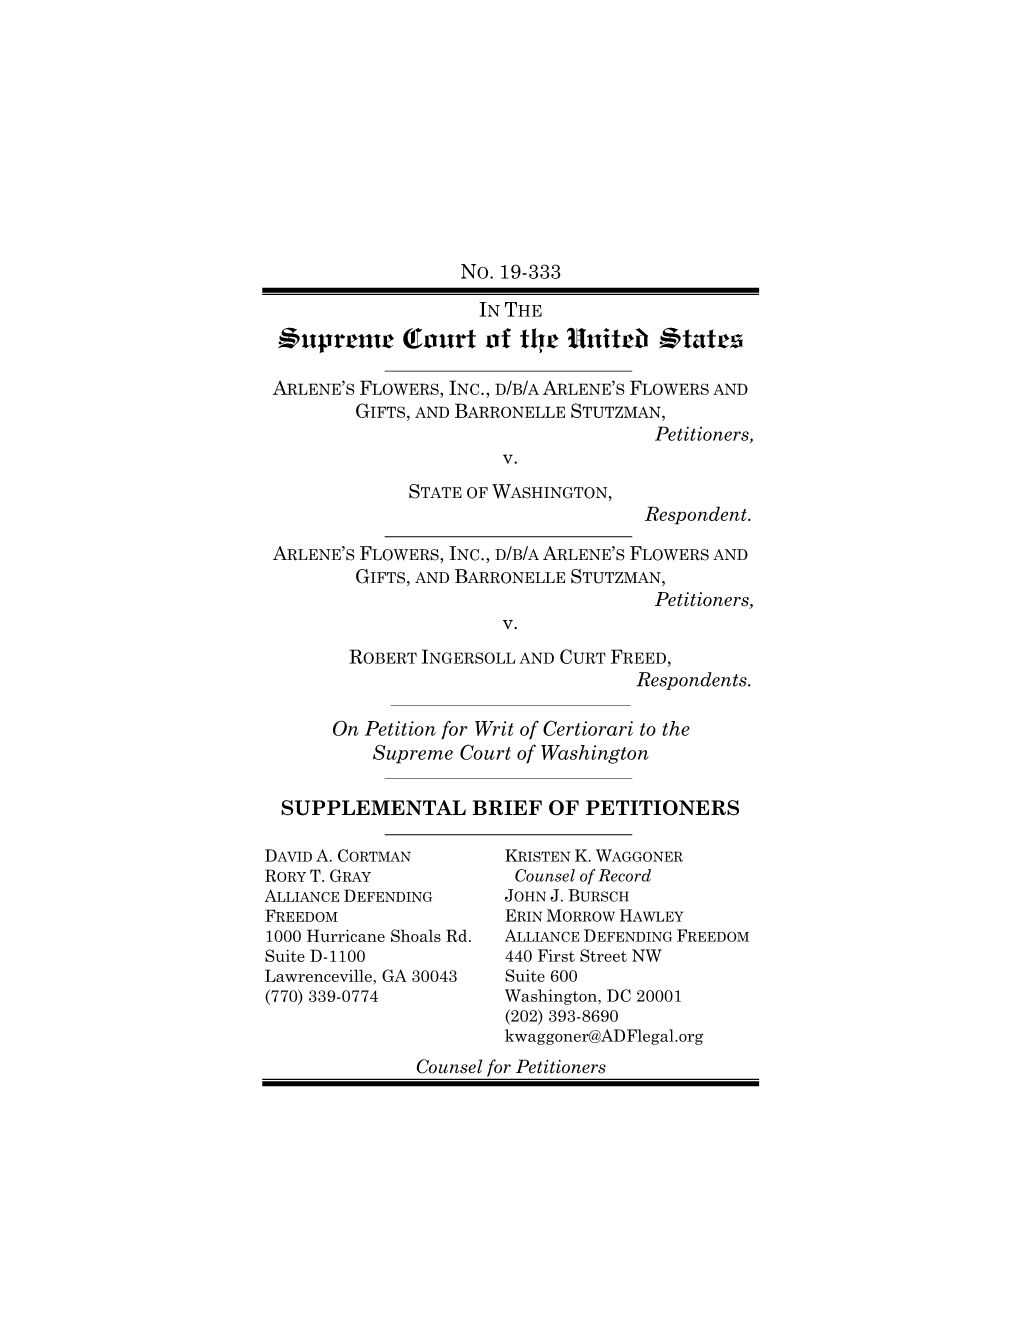 Supplemental Brief of Petitioners